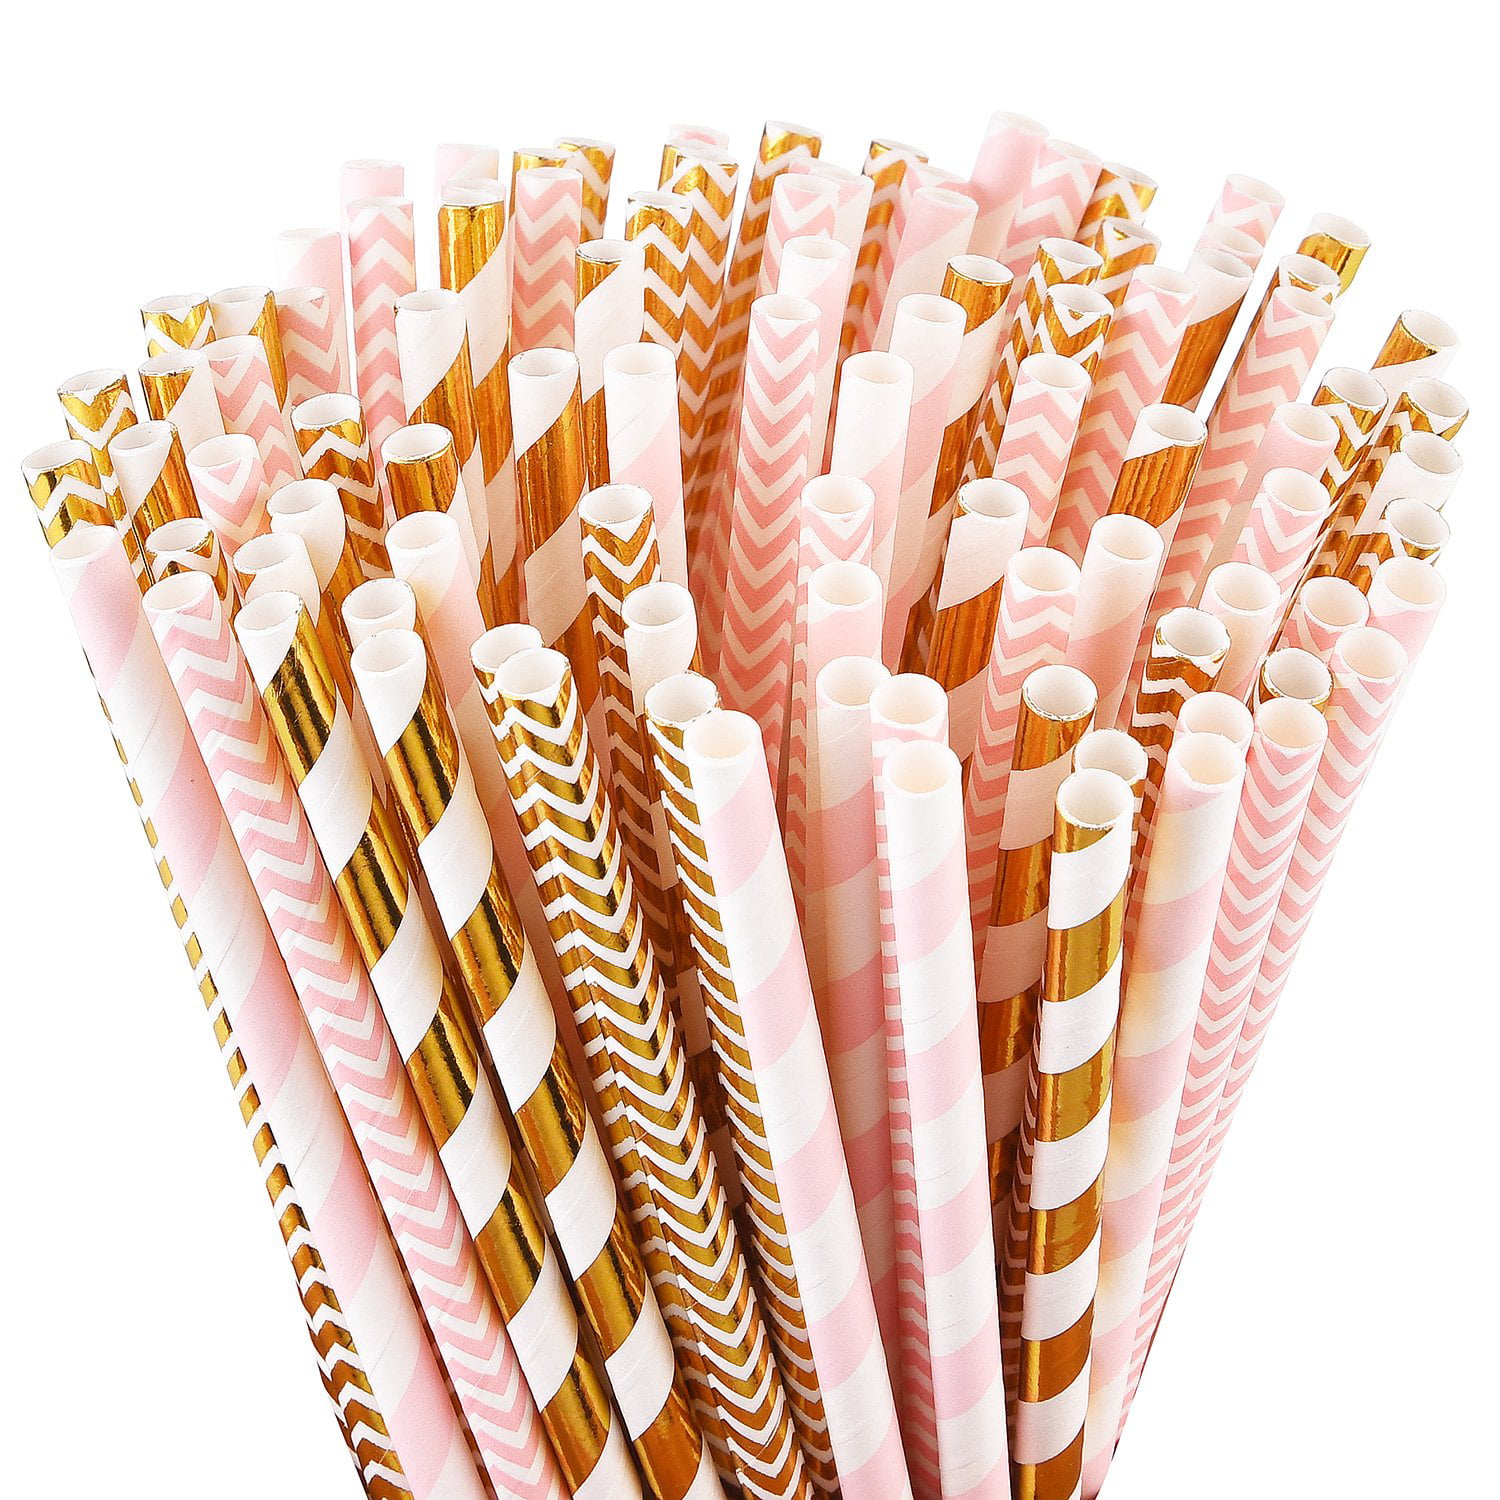 Bridal/Baby Shower and Christmas Decorations Supplies Smoothies Birthday Pack of 100 Party Straws for Juice Wedding ALINK Biodegradable Light Blue White Paper Straws Cocktail 